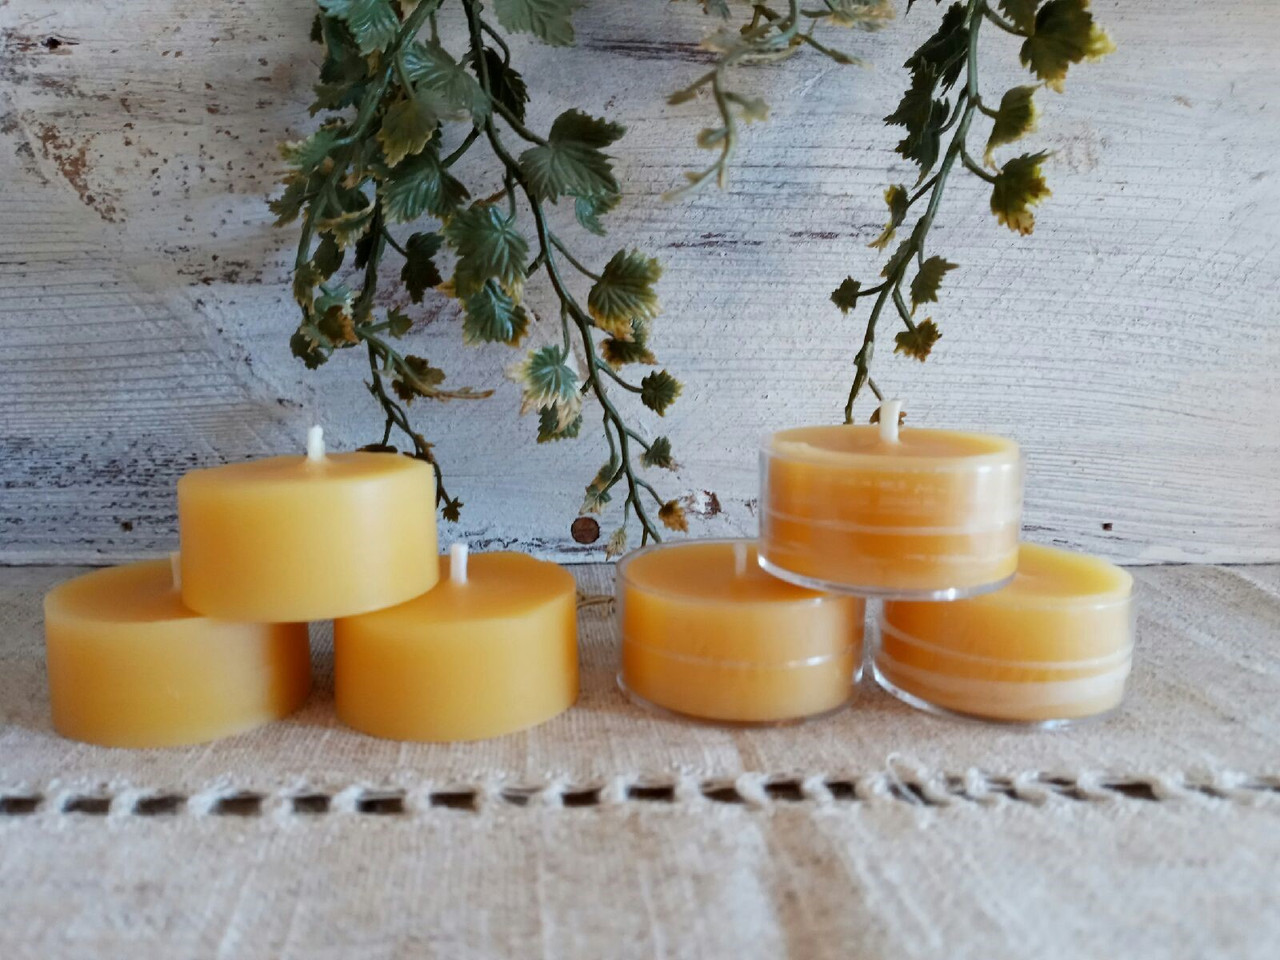 100% Pure & Natural Beeswax Tea Light Candles Unscented Candle Anti Alergic  Candle Aromatherapy Meditation Healing Bulk Pack 